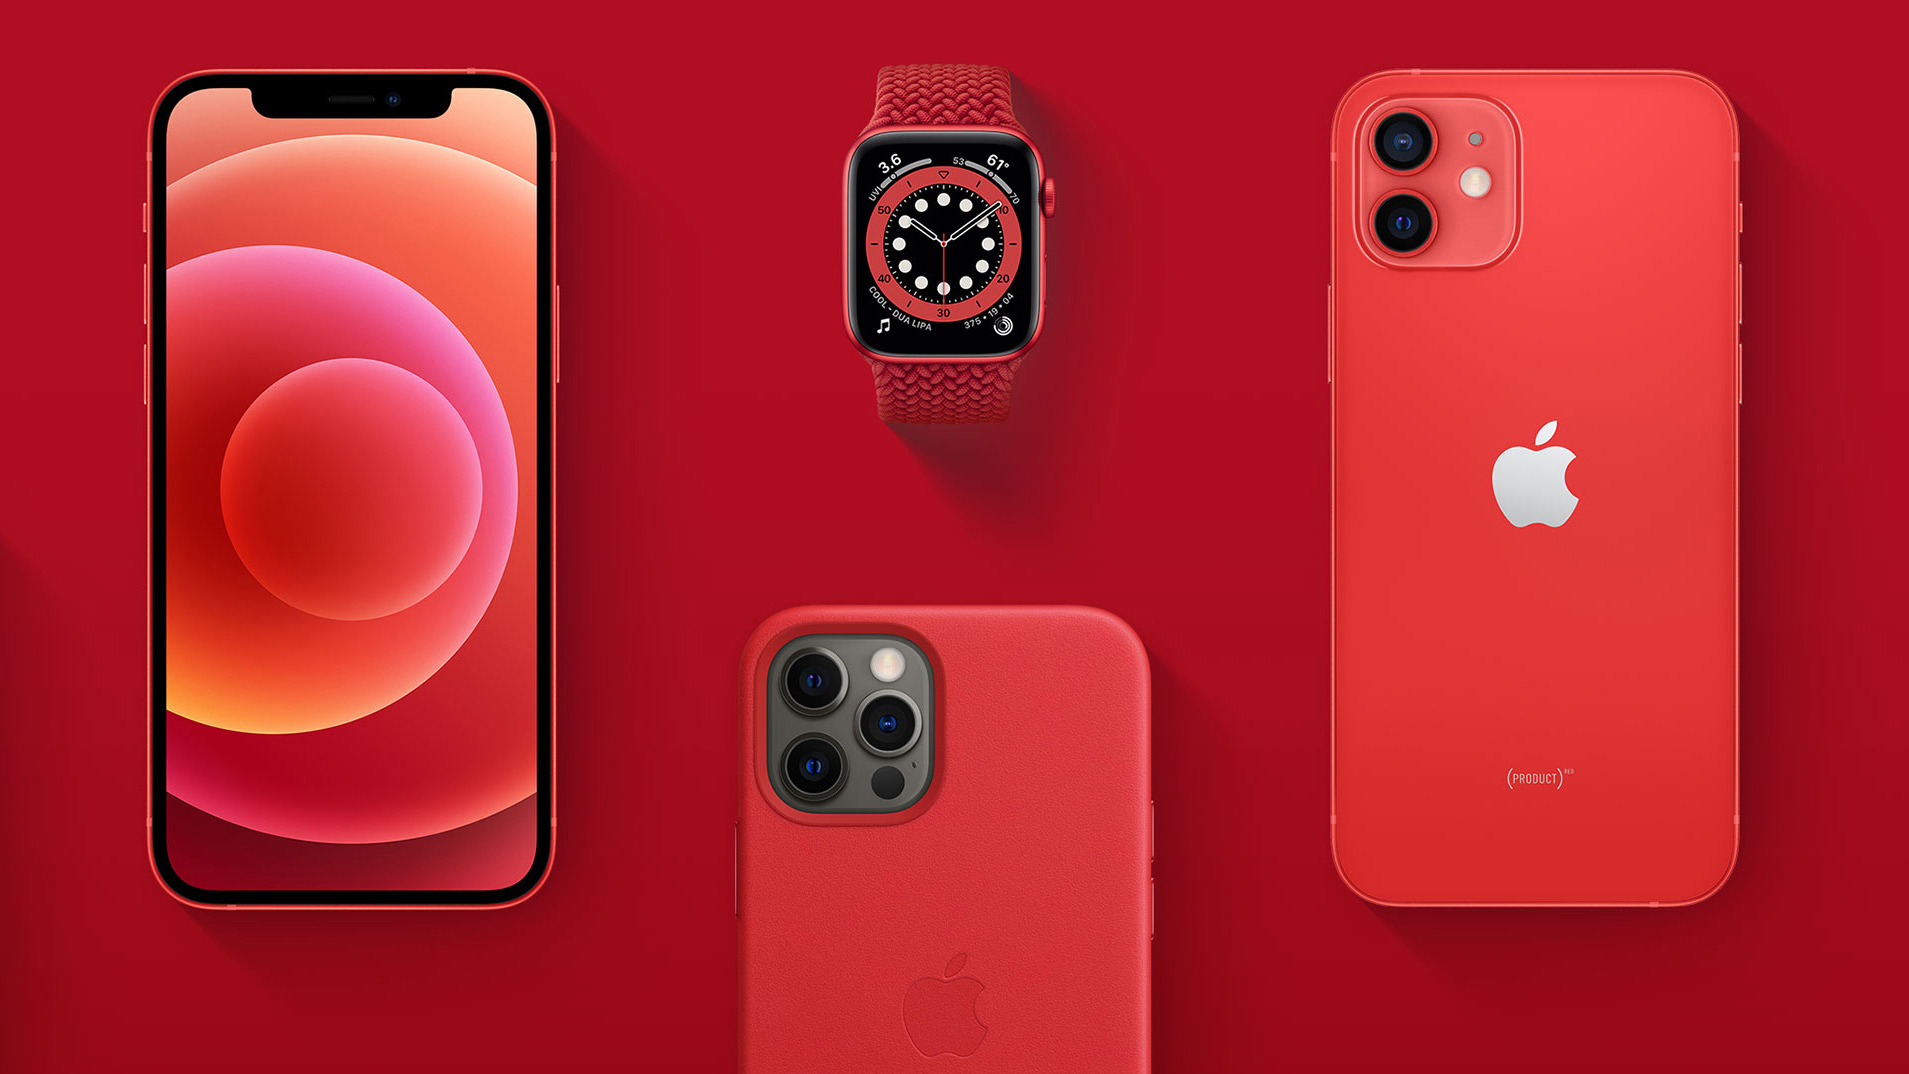 Apple Product Red range on a red background